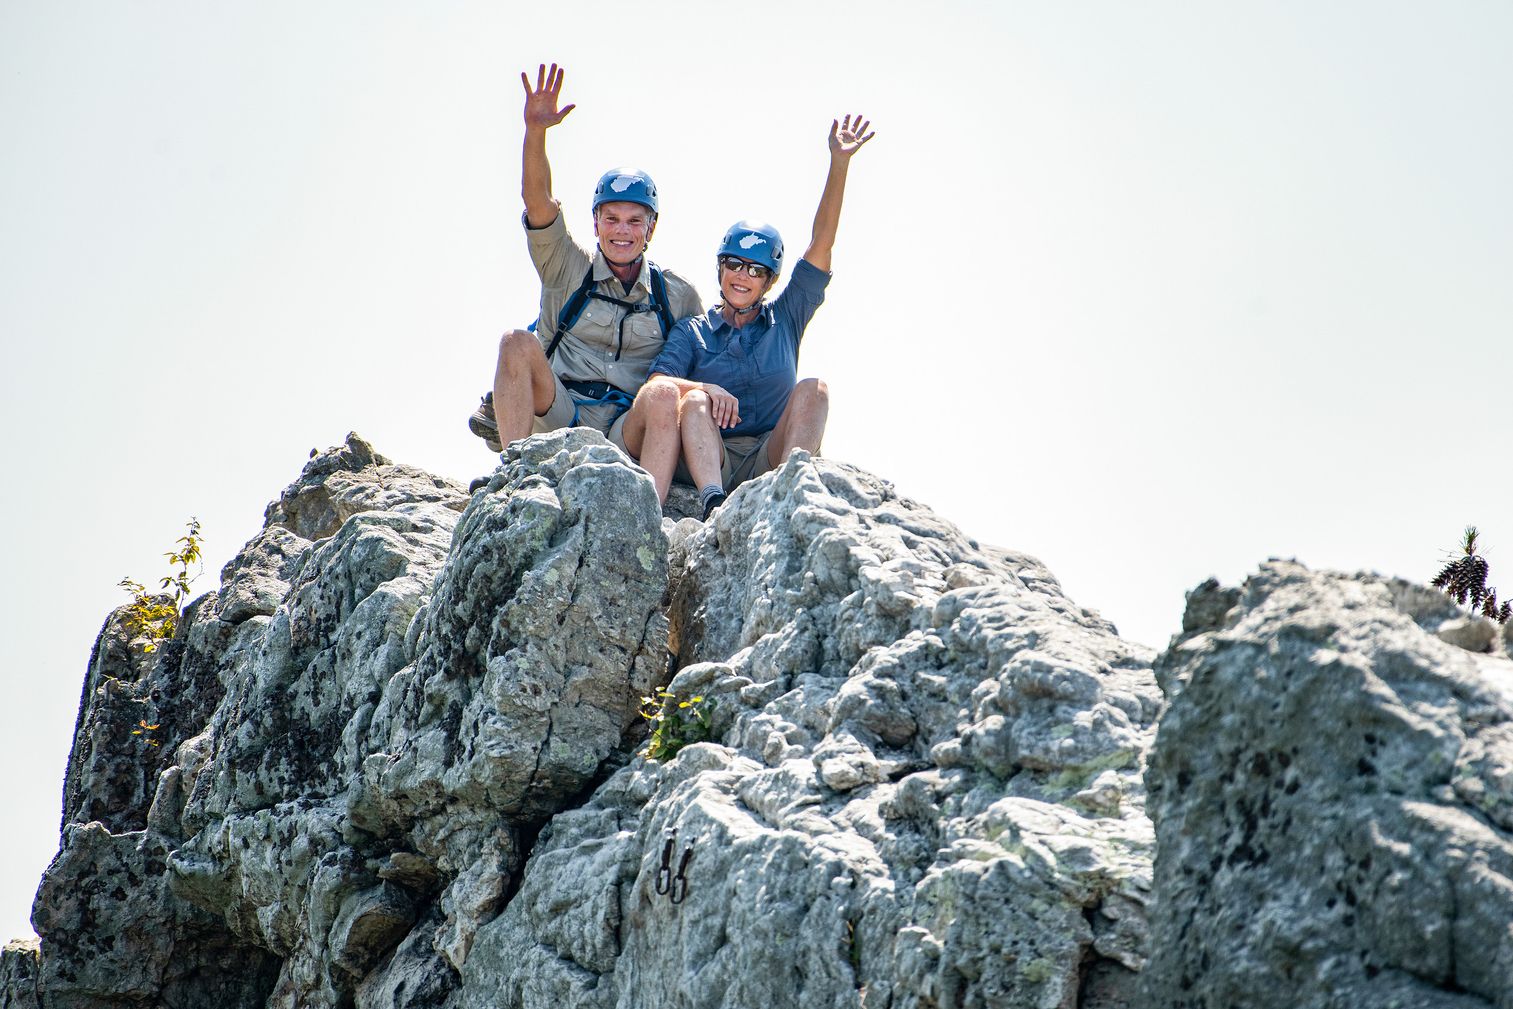 Brad and Alys Smith sit on a rocky summit with arms raised and wearing helmets.